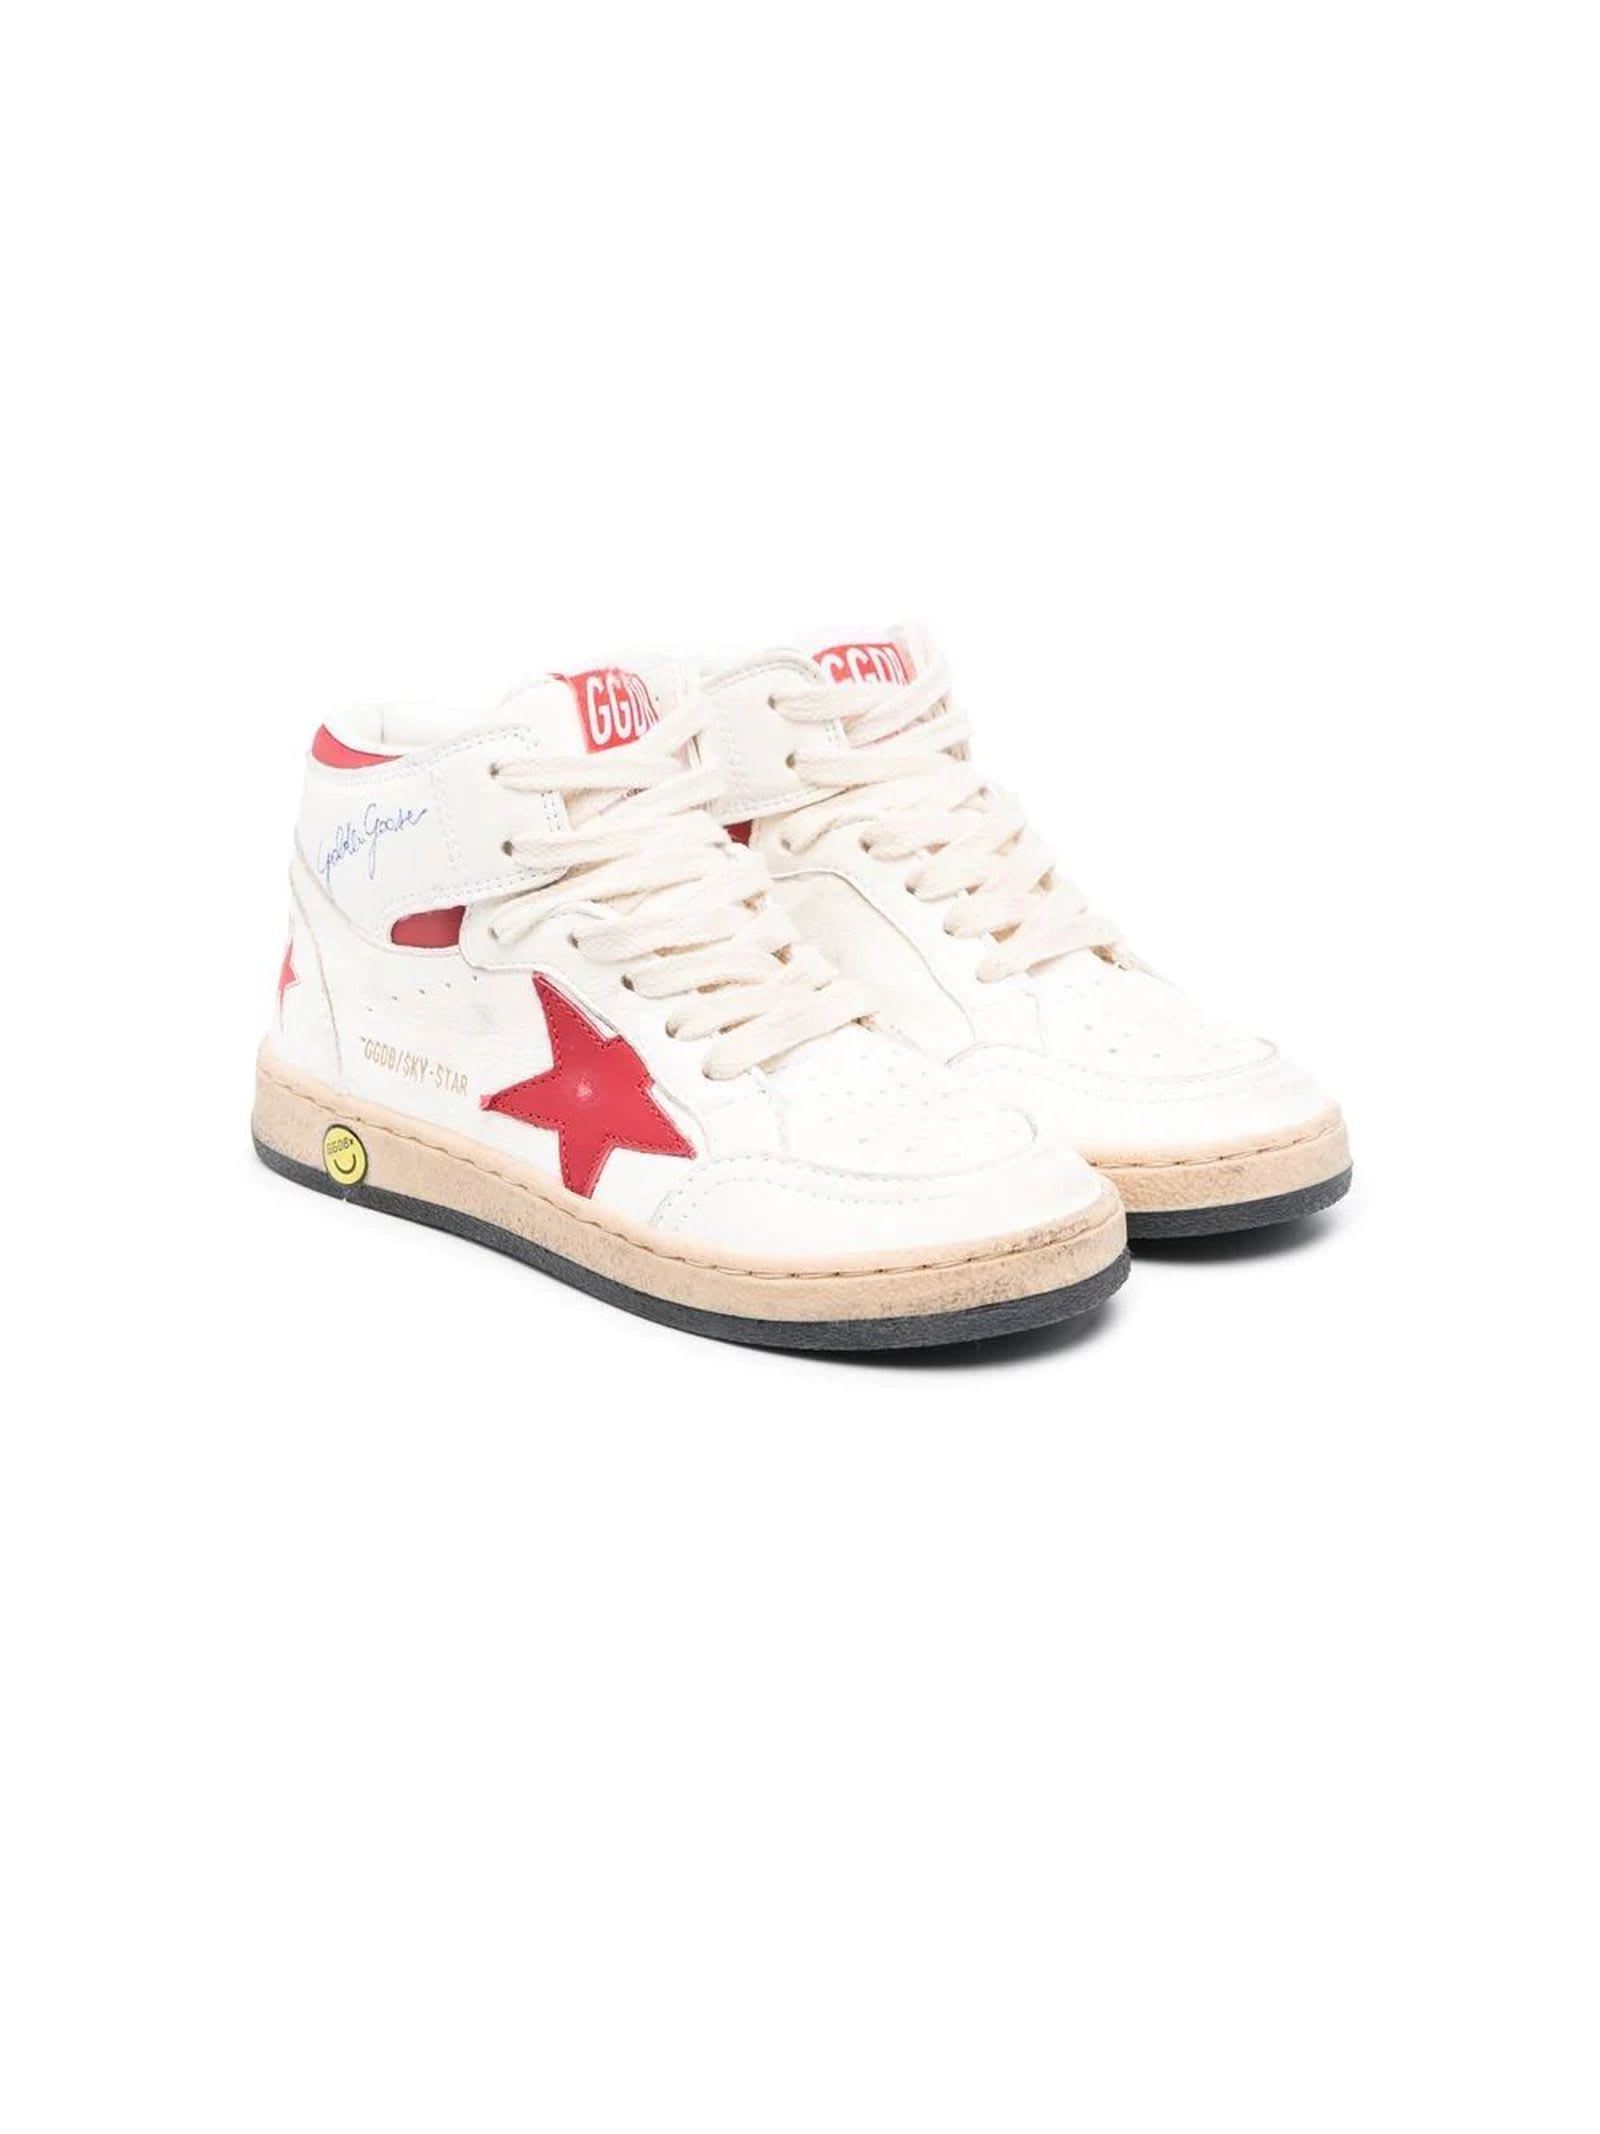 Golden Goose White Calf Leather Sneakers